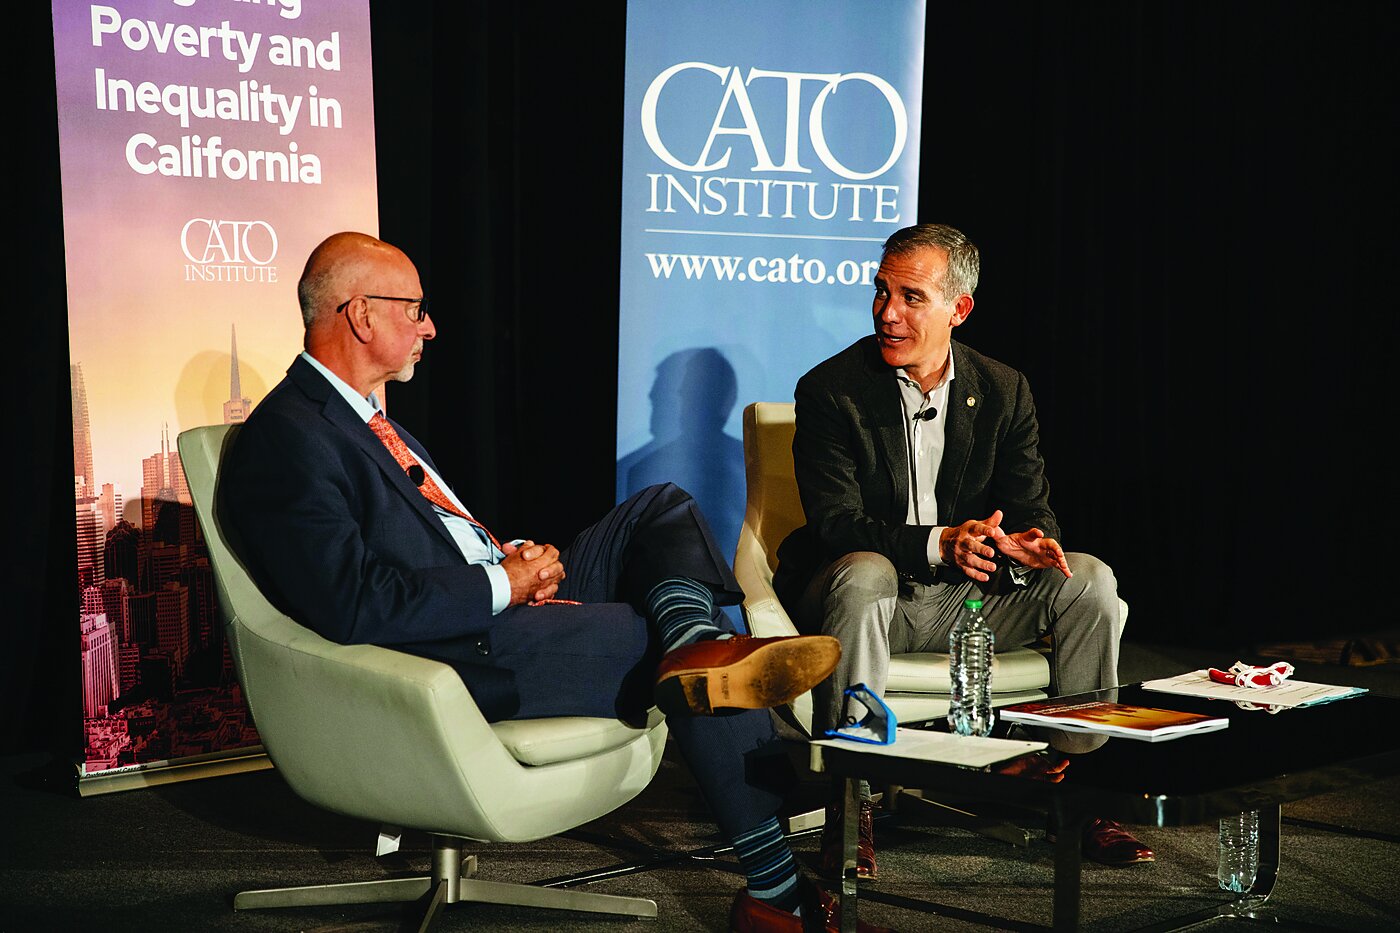 Michael Tanner and Eric Garcetti discuss recommendations and findings from the Project on Poverty and Inequality in California